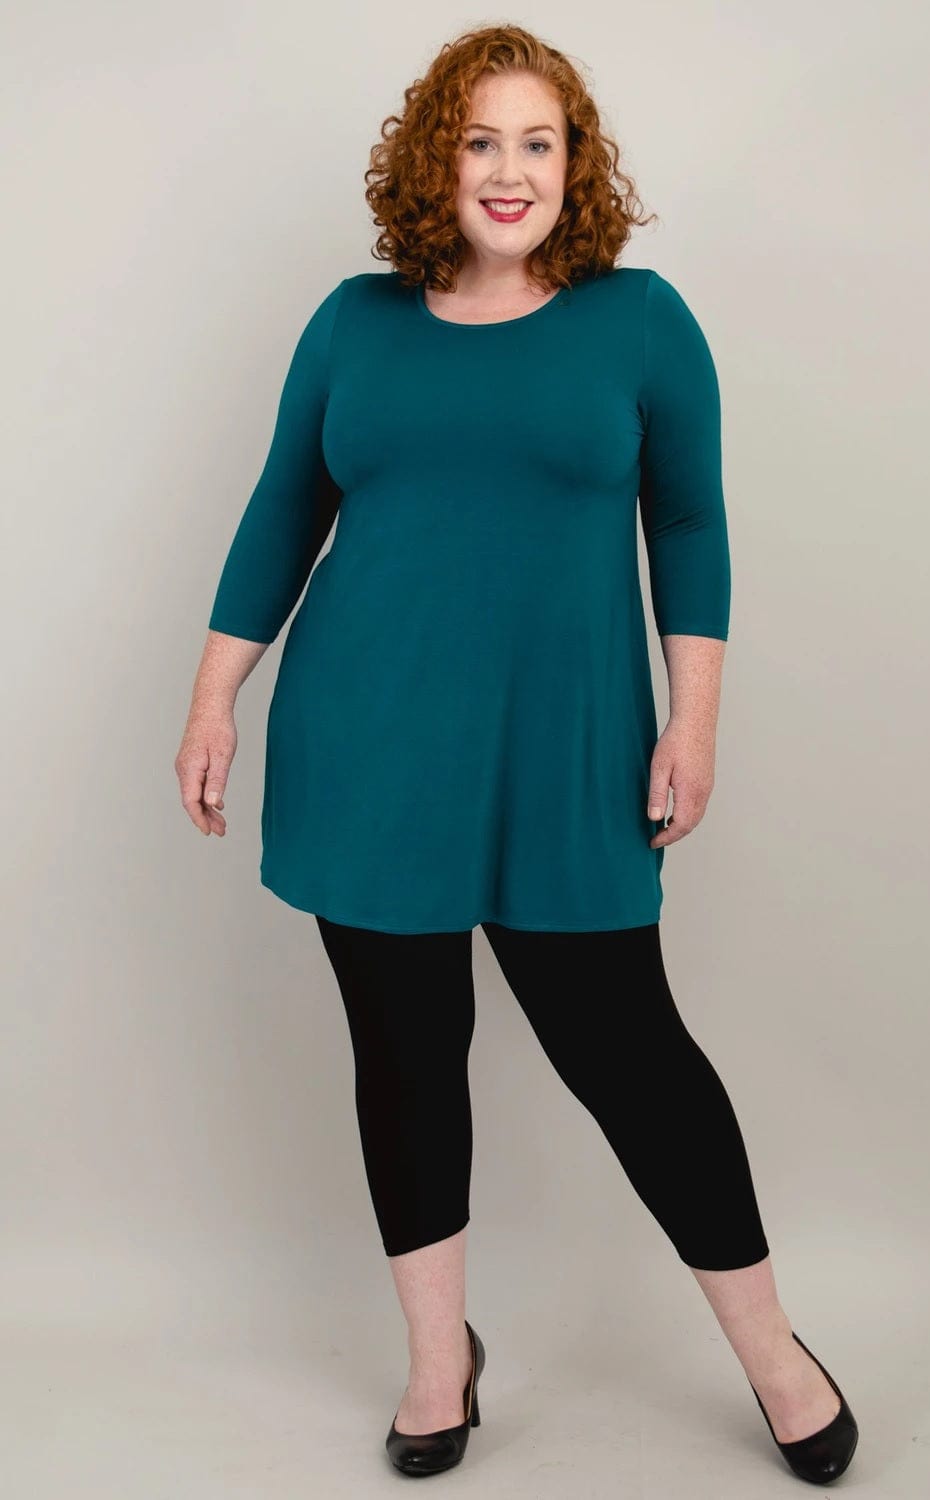 Blue Sky Women's Long Sleeve Top Teal / S Scoop neck - Perfect Tunic